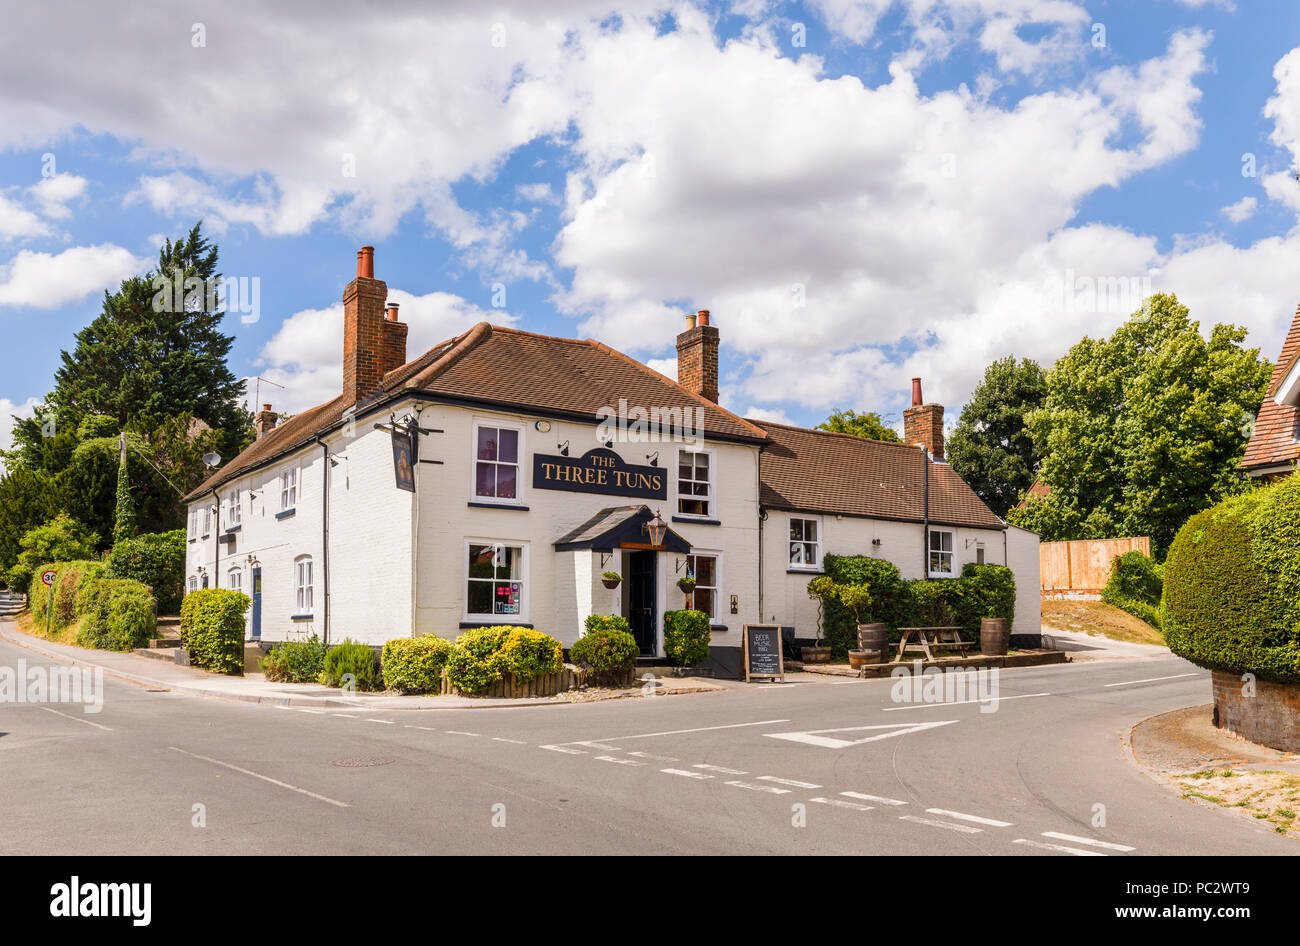 The Three Tuns, a traditional free house country pub in Great Bedwyn, a rural village community in Wiltshire, southern England on a sunny summer day Stock Photo